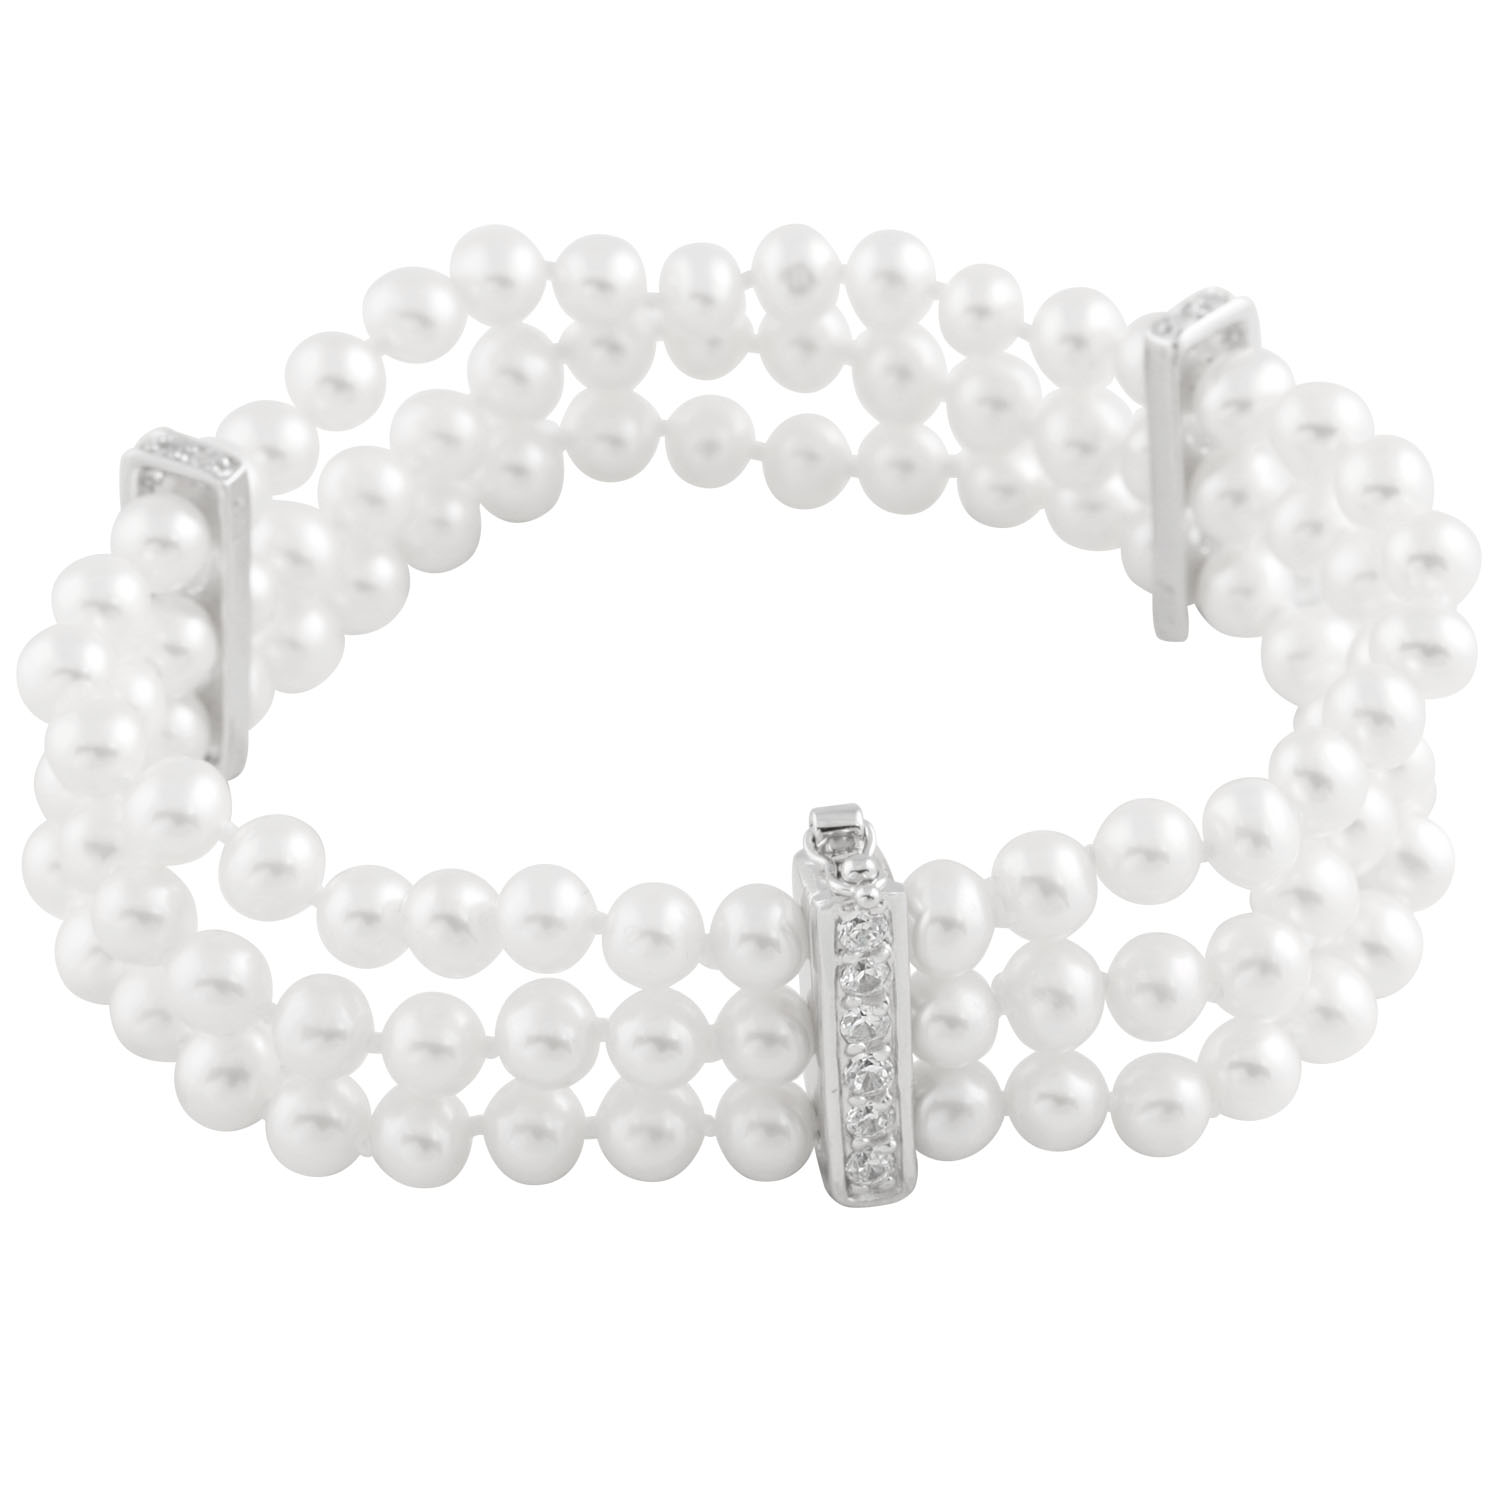 New pearl bracelet with Sterling Silver spacer